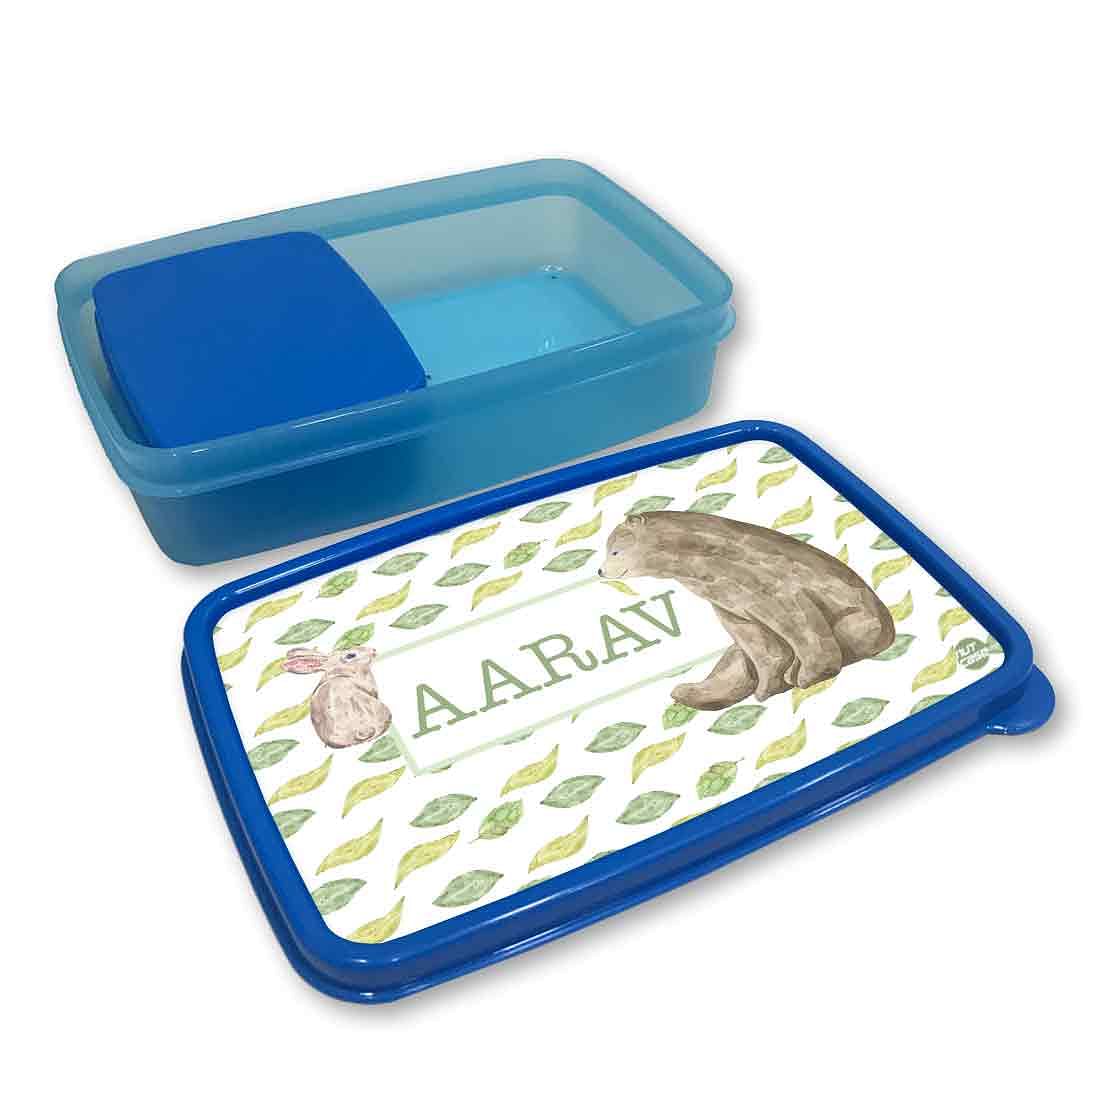 Personalized Snack Box for Kids Plastic Lunch Box for Boys -Forest Wonderland Nutcase